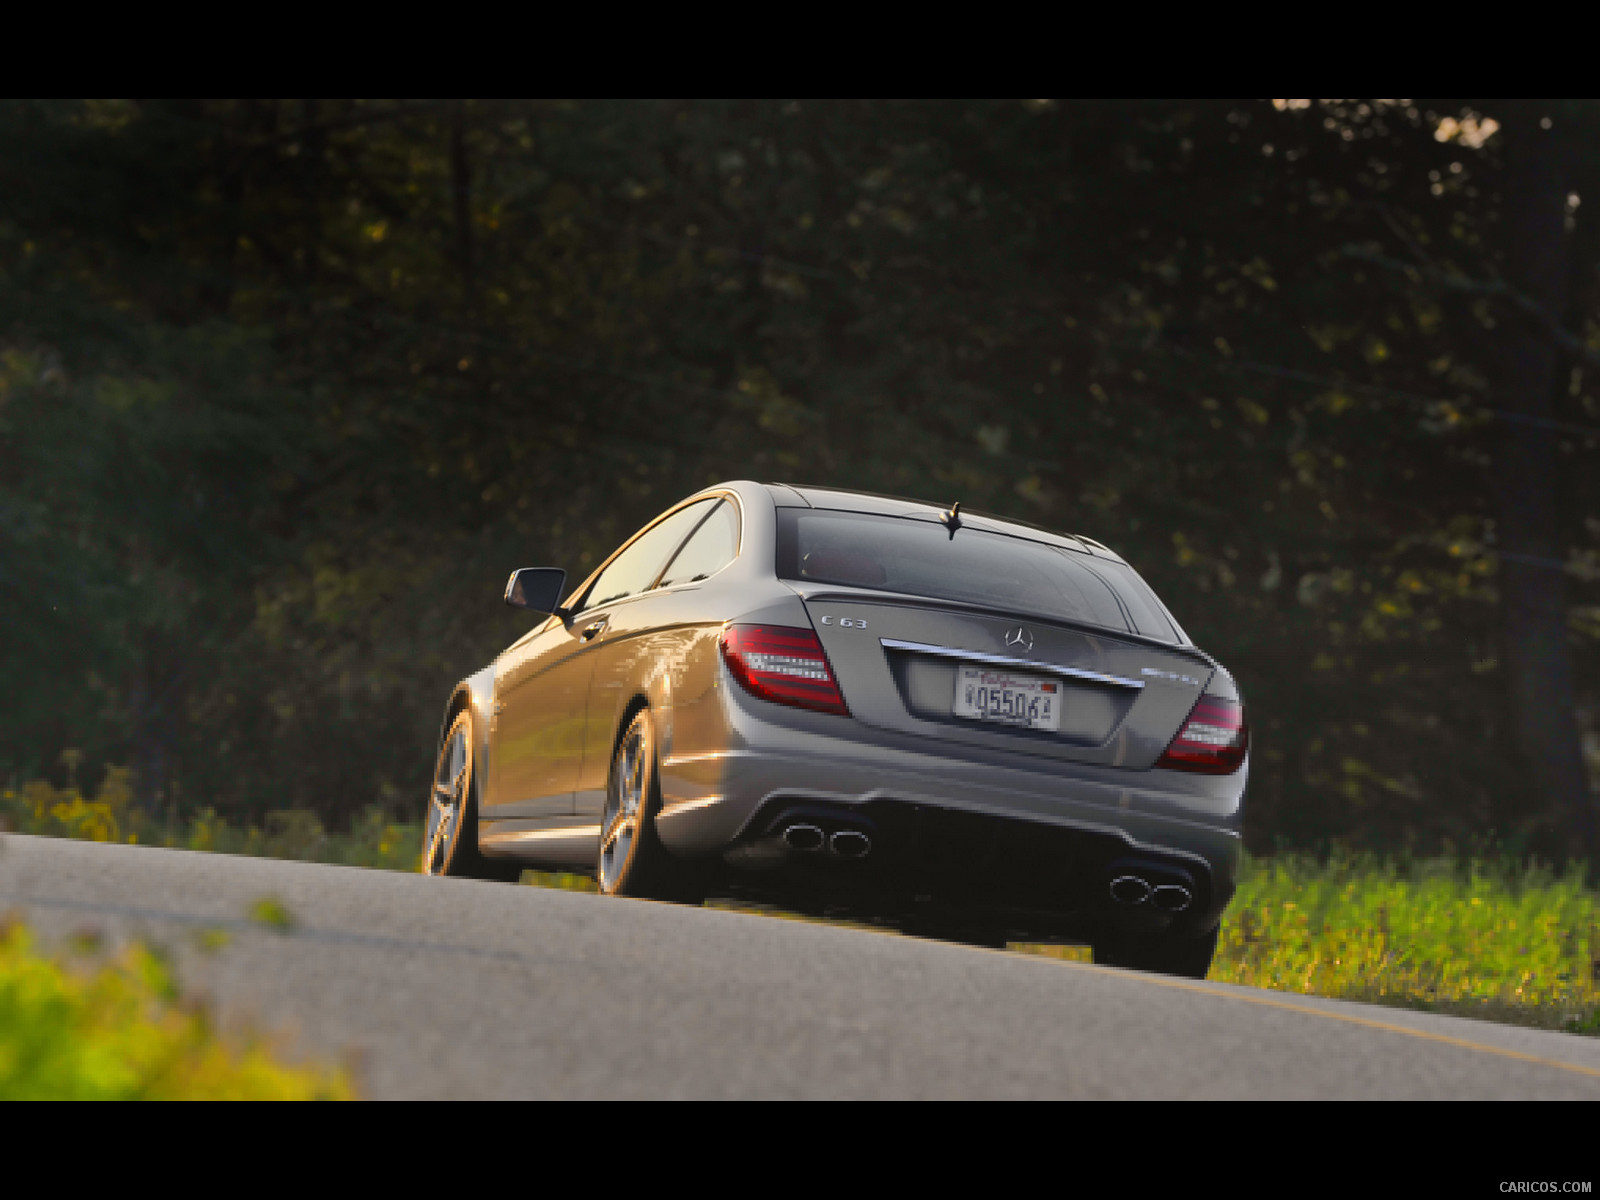 Mercedes-Benz C63 AMG Coupe (2012) with MCT transmission - , #14 of 64